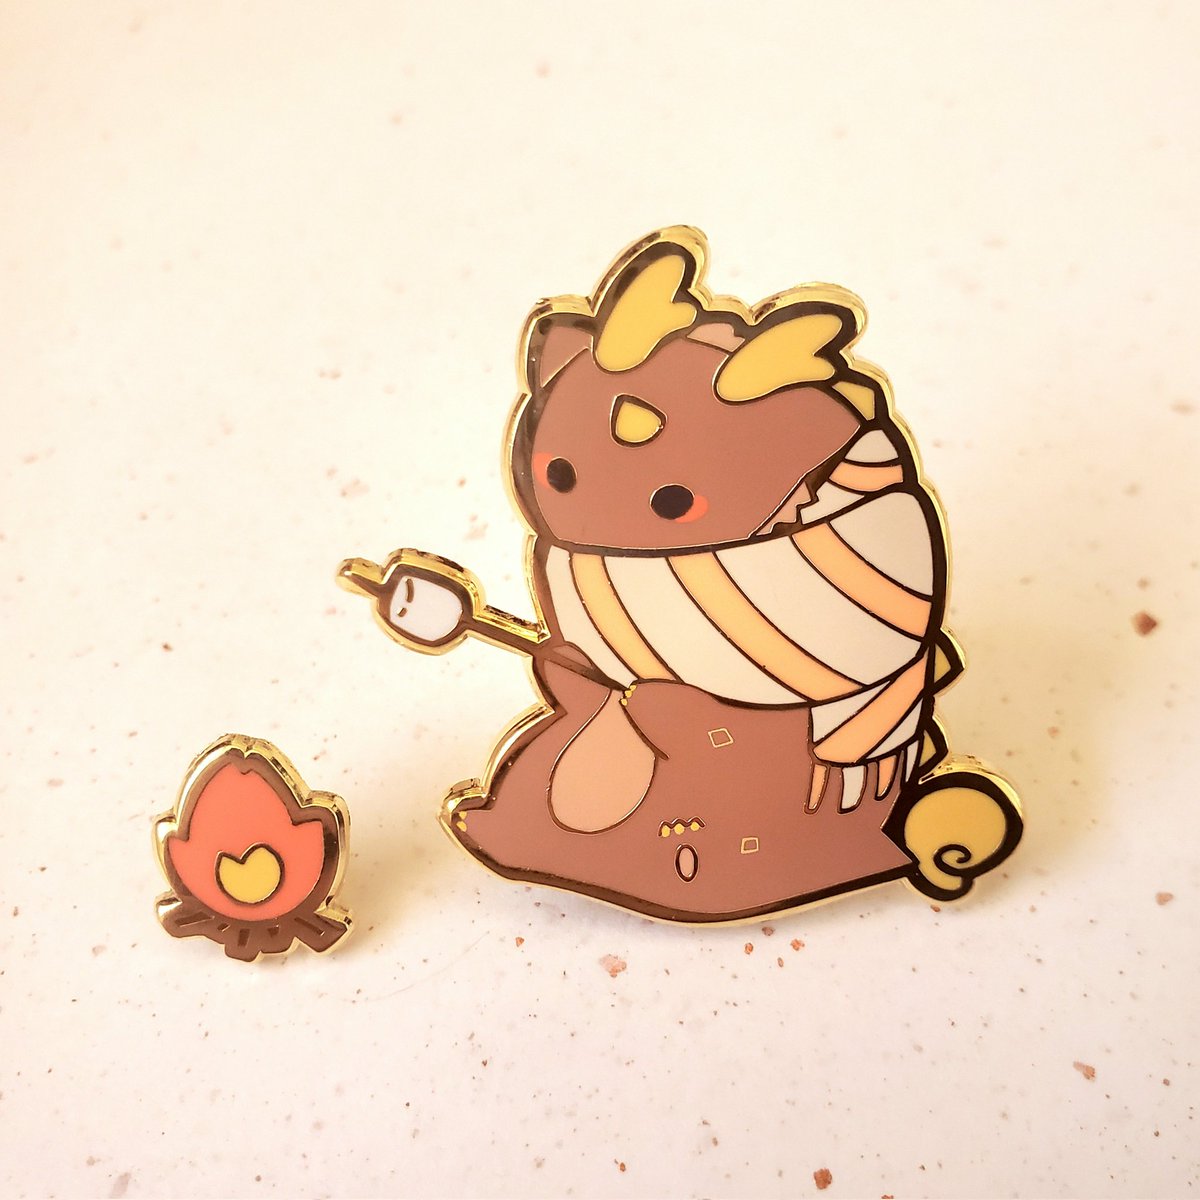 「These pins will be available next shop u」|Nagarniaのイラスト